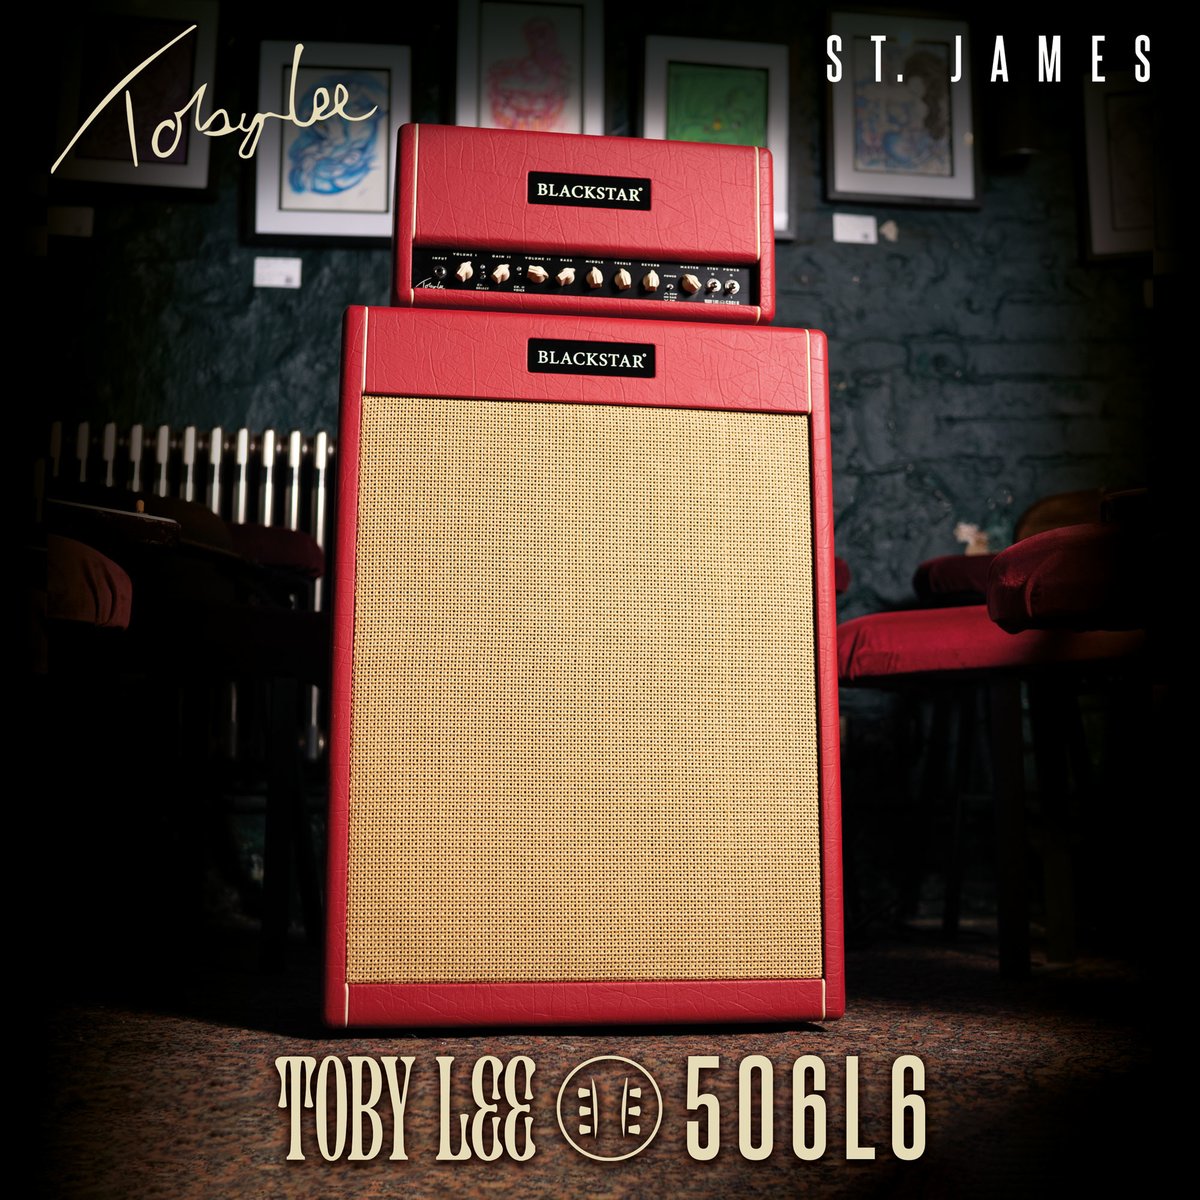 Toby Lee Signature St. James - choose the power of 6L6! 🍎  

Click the link to learn more - blackstaramps.com/toby-lee-signa…